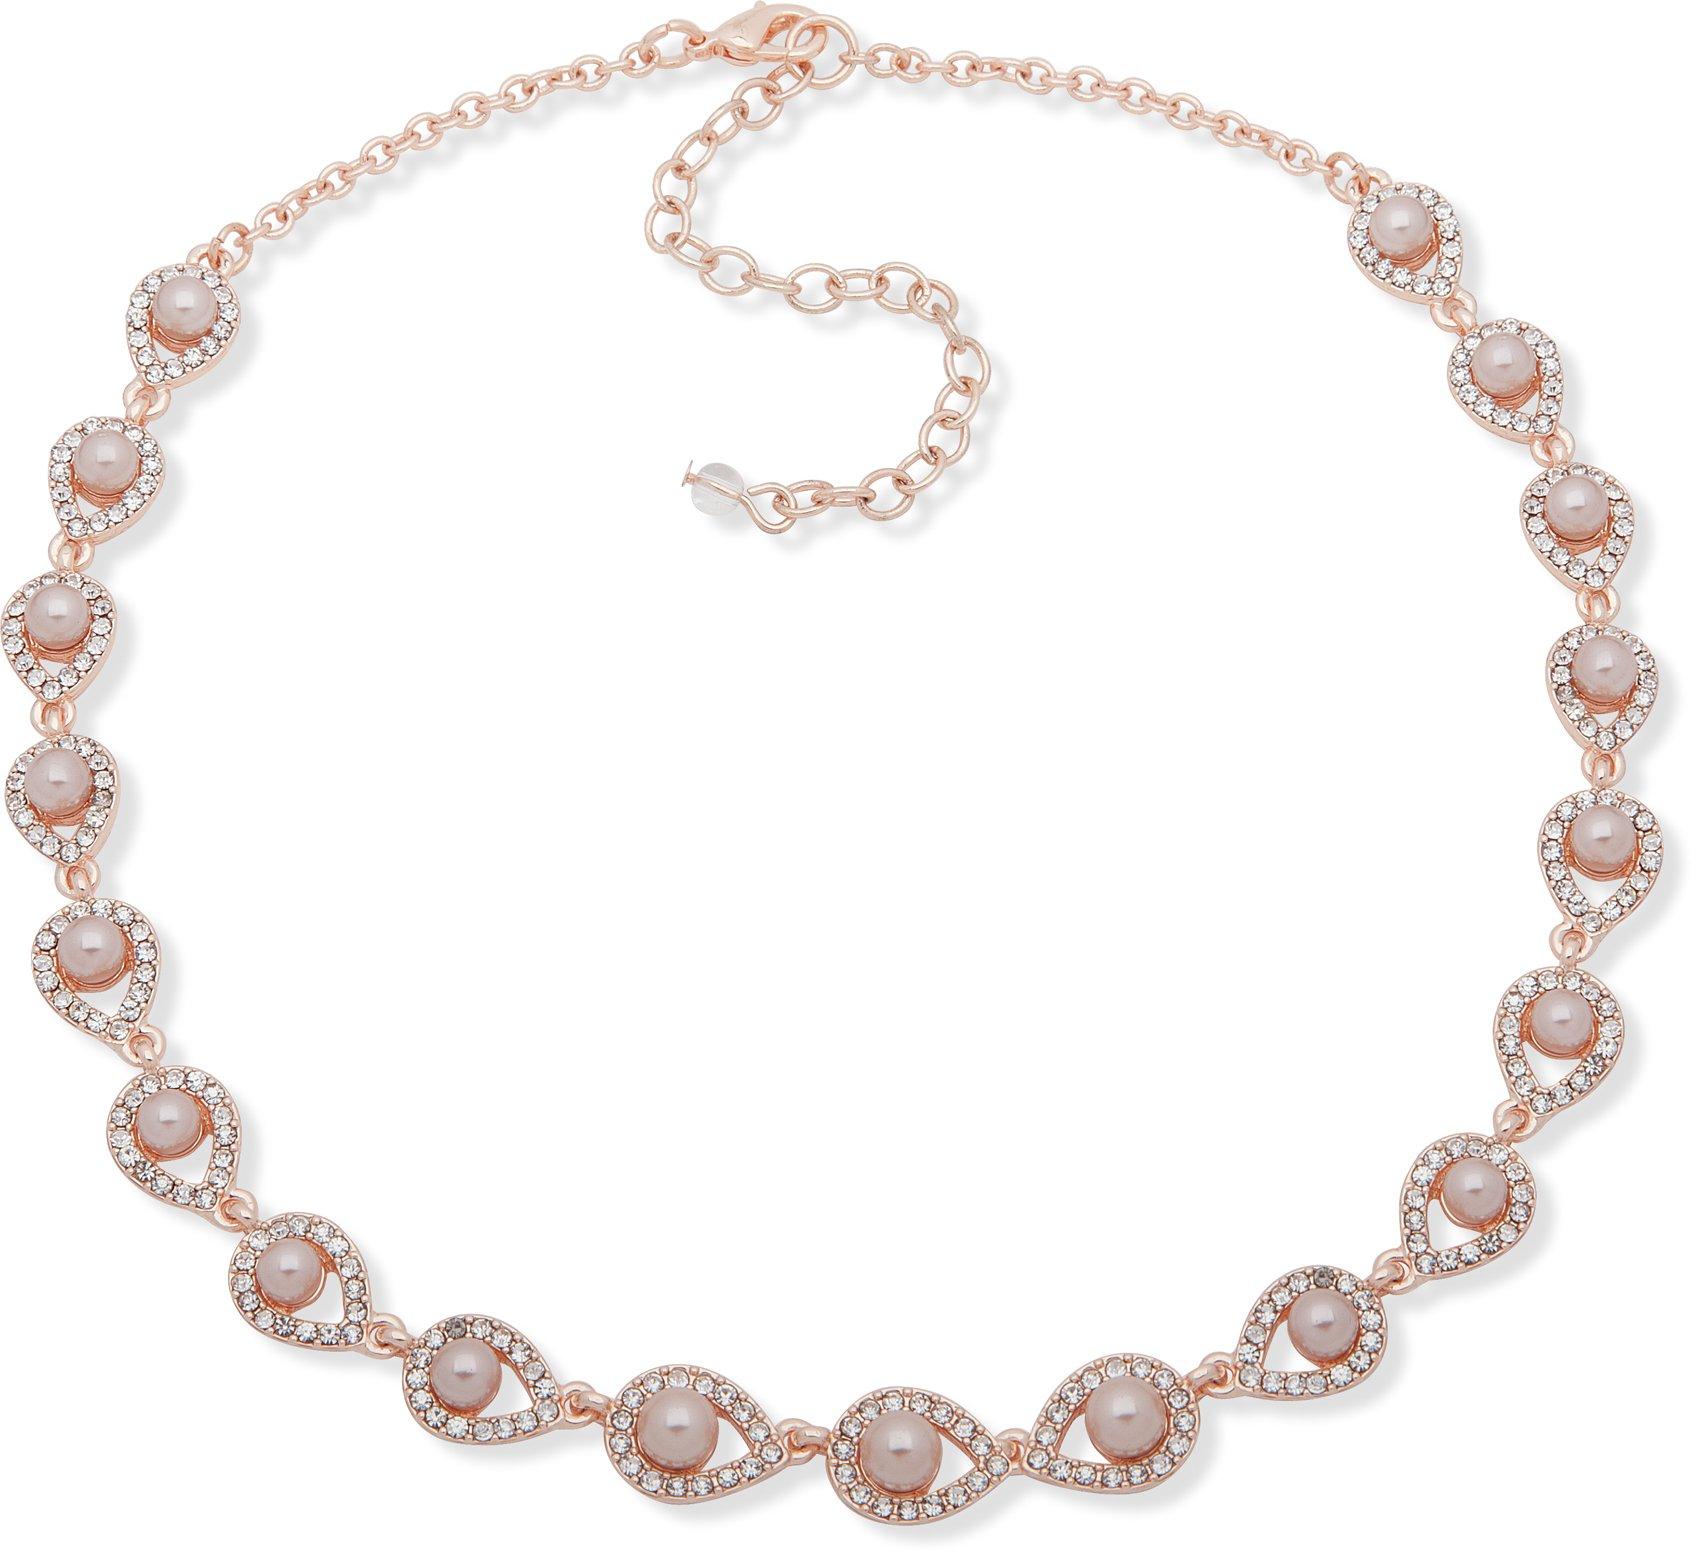 You're Invited Rose Gold Tone Faux Pearl Collar